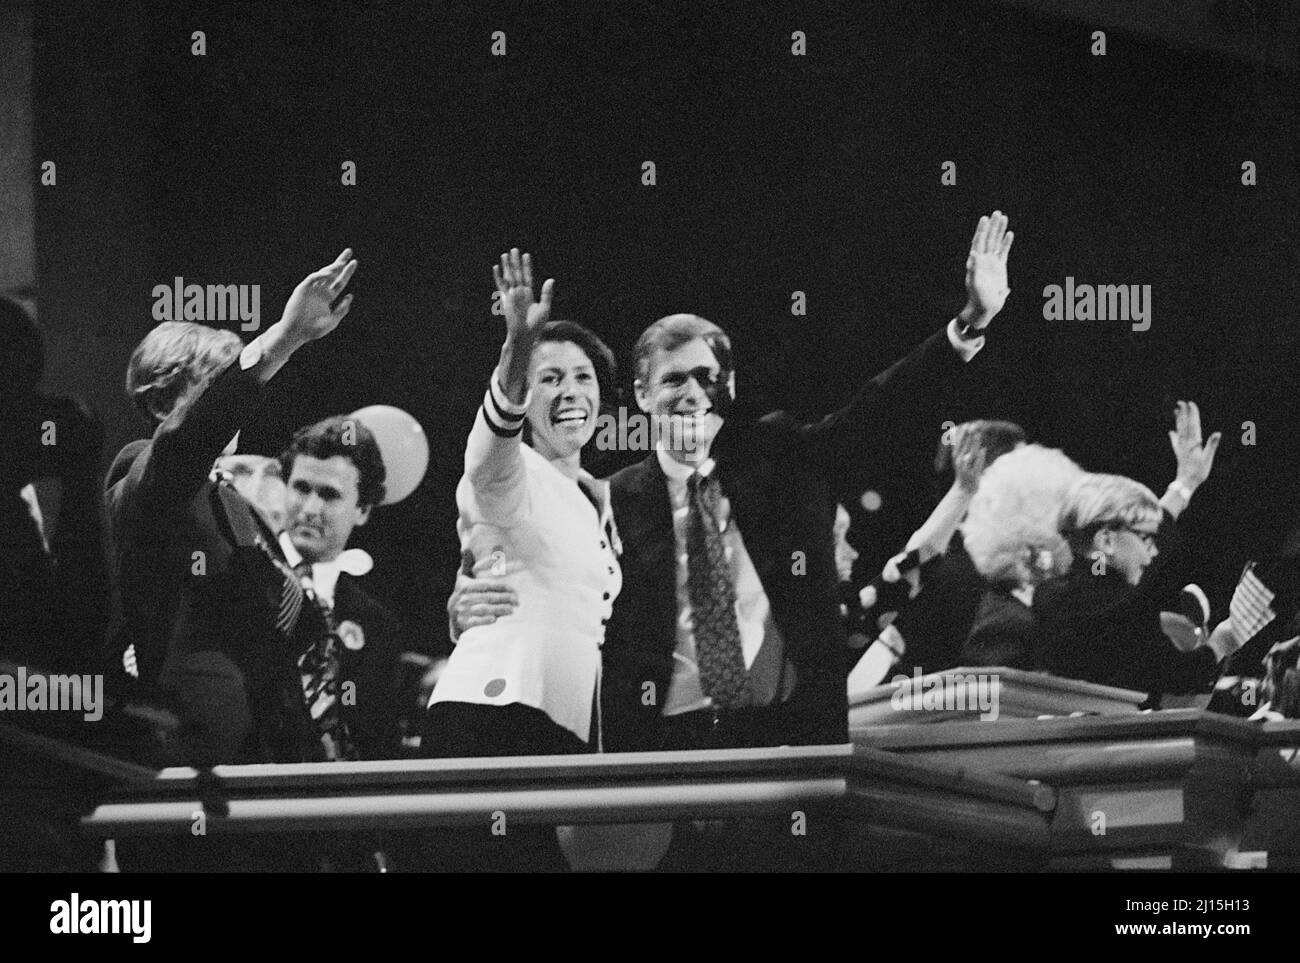 Marilyn Quayle, U.S. Vice President Dan Quayle, waving at Podium during Republican National Convention, Houston, Texas, USA, Laura Patterson, Roll Call Photograph Collection, August 1992 Stock Photo